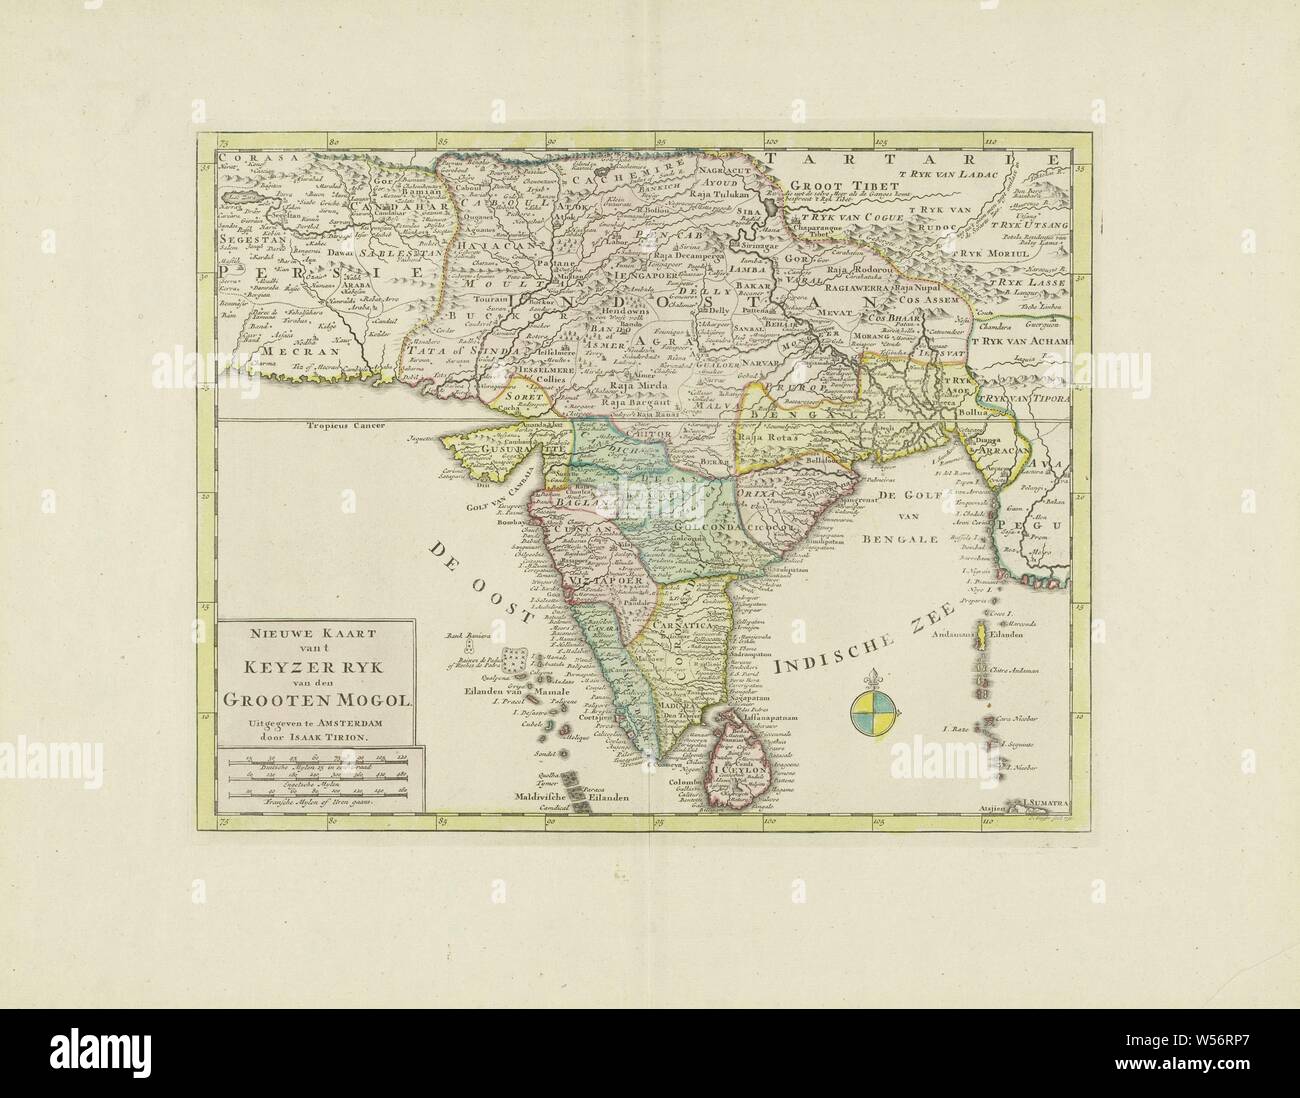 Map of India, New map of 't Keyzerryk van den Grooten Mogol (title on object), different areas colored differently, bottom right compass rose, bottom left under inscription the scale in German, English and French miles (1: 12.5 million), maps of separate countries or regions, India, Sri Lanka, Jacob Keyser (mentioned on object), Amsterdam, 1730 and/or 1744, paper, engraving, h 284 mm × w 364 mm Stock Photo